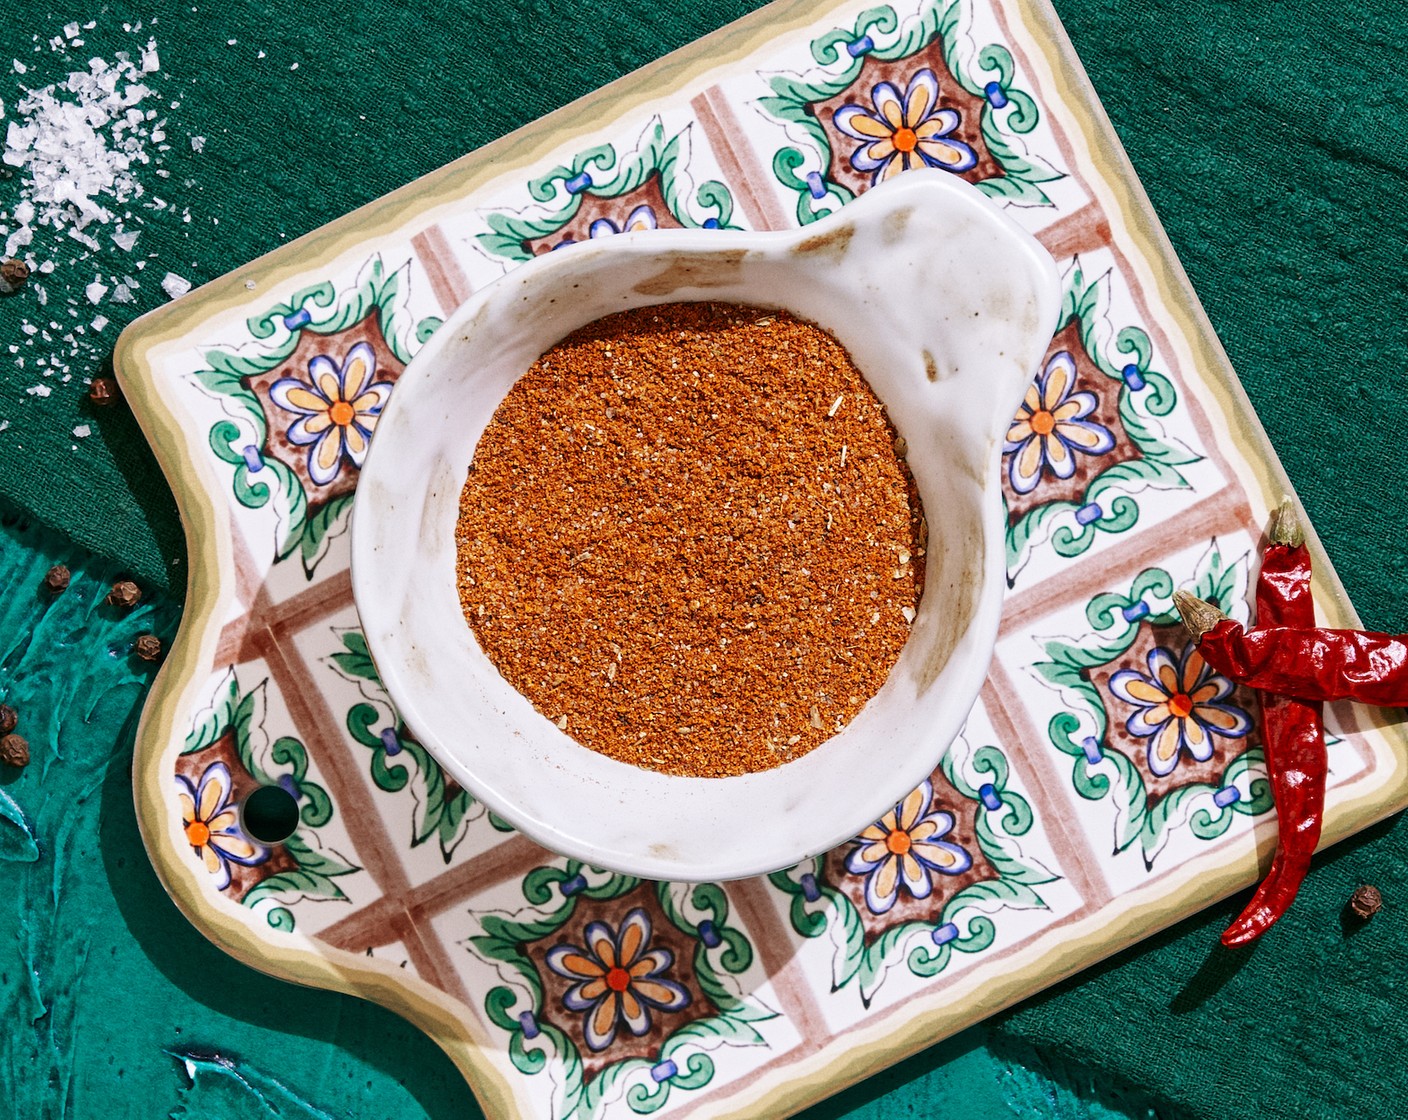 step 1 In a small bowl or jar, add Chili Powder (2 Tbsp), Ground Cumin (1 Tbsp), Smoked Paprika (1 tsp), McCormick® Garlic Powder (1 tsp), Fine Salt (1 tsp), Freshly Ground Black Pepper (1 tsp), Dried Oregano (1/2 tsp), Onion Powder (1/2 tsp), Granulated Sugar (1/2 tsp), and Cayenne Pepper (1/2 tsp) and mix until combined. Store in an airtight container.